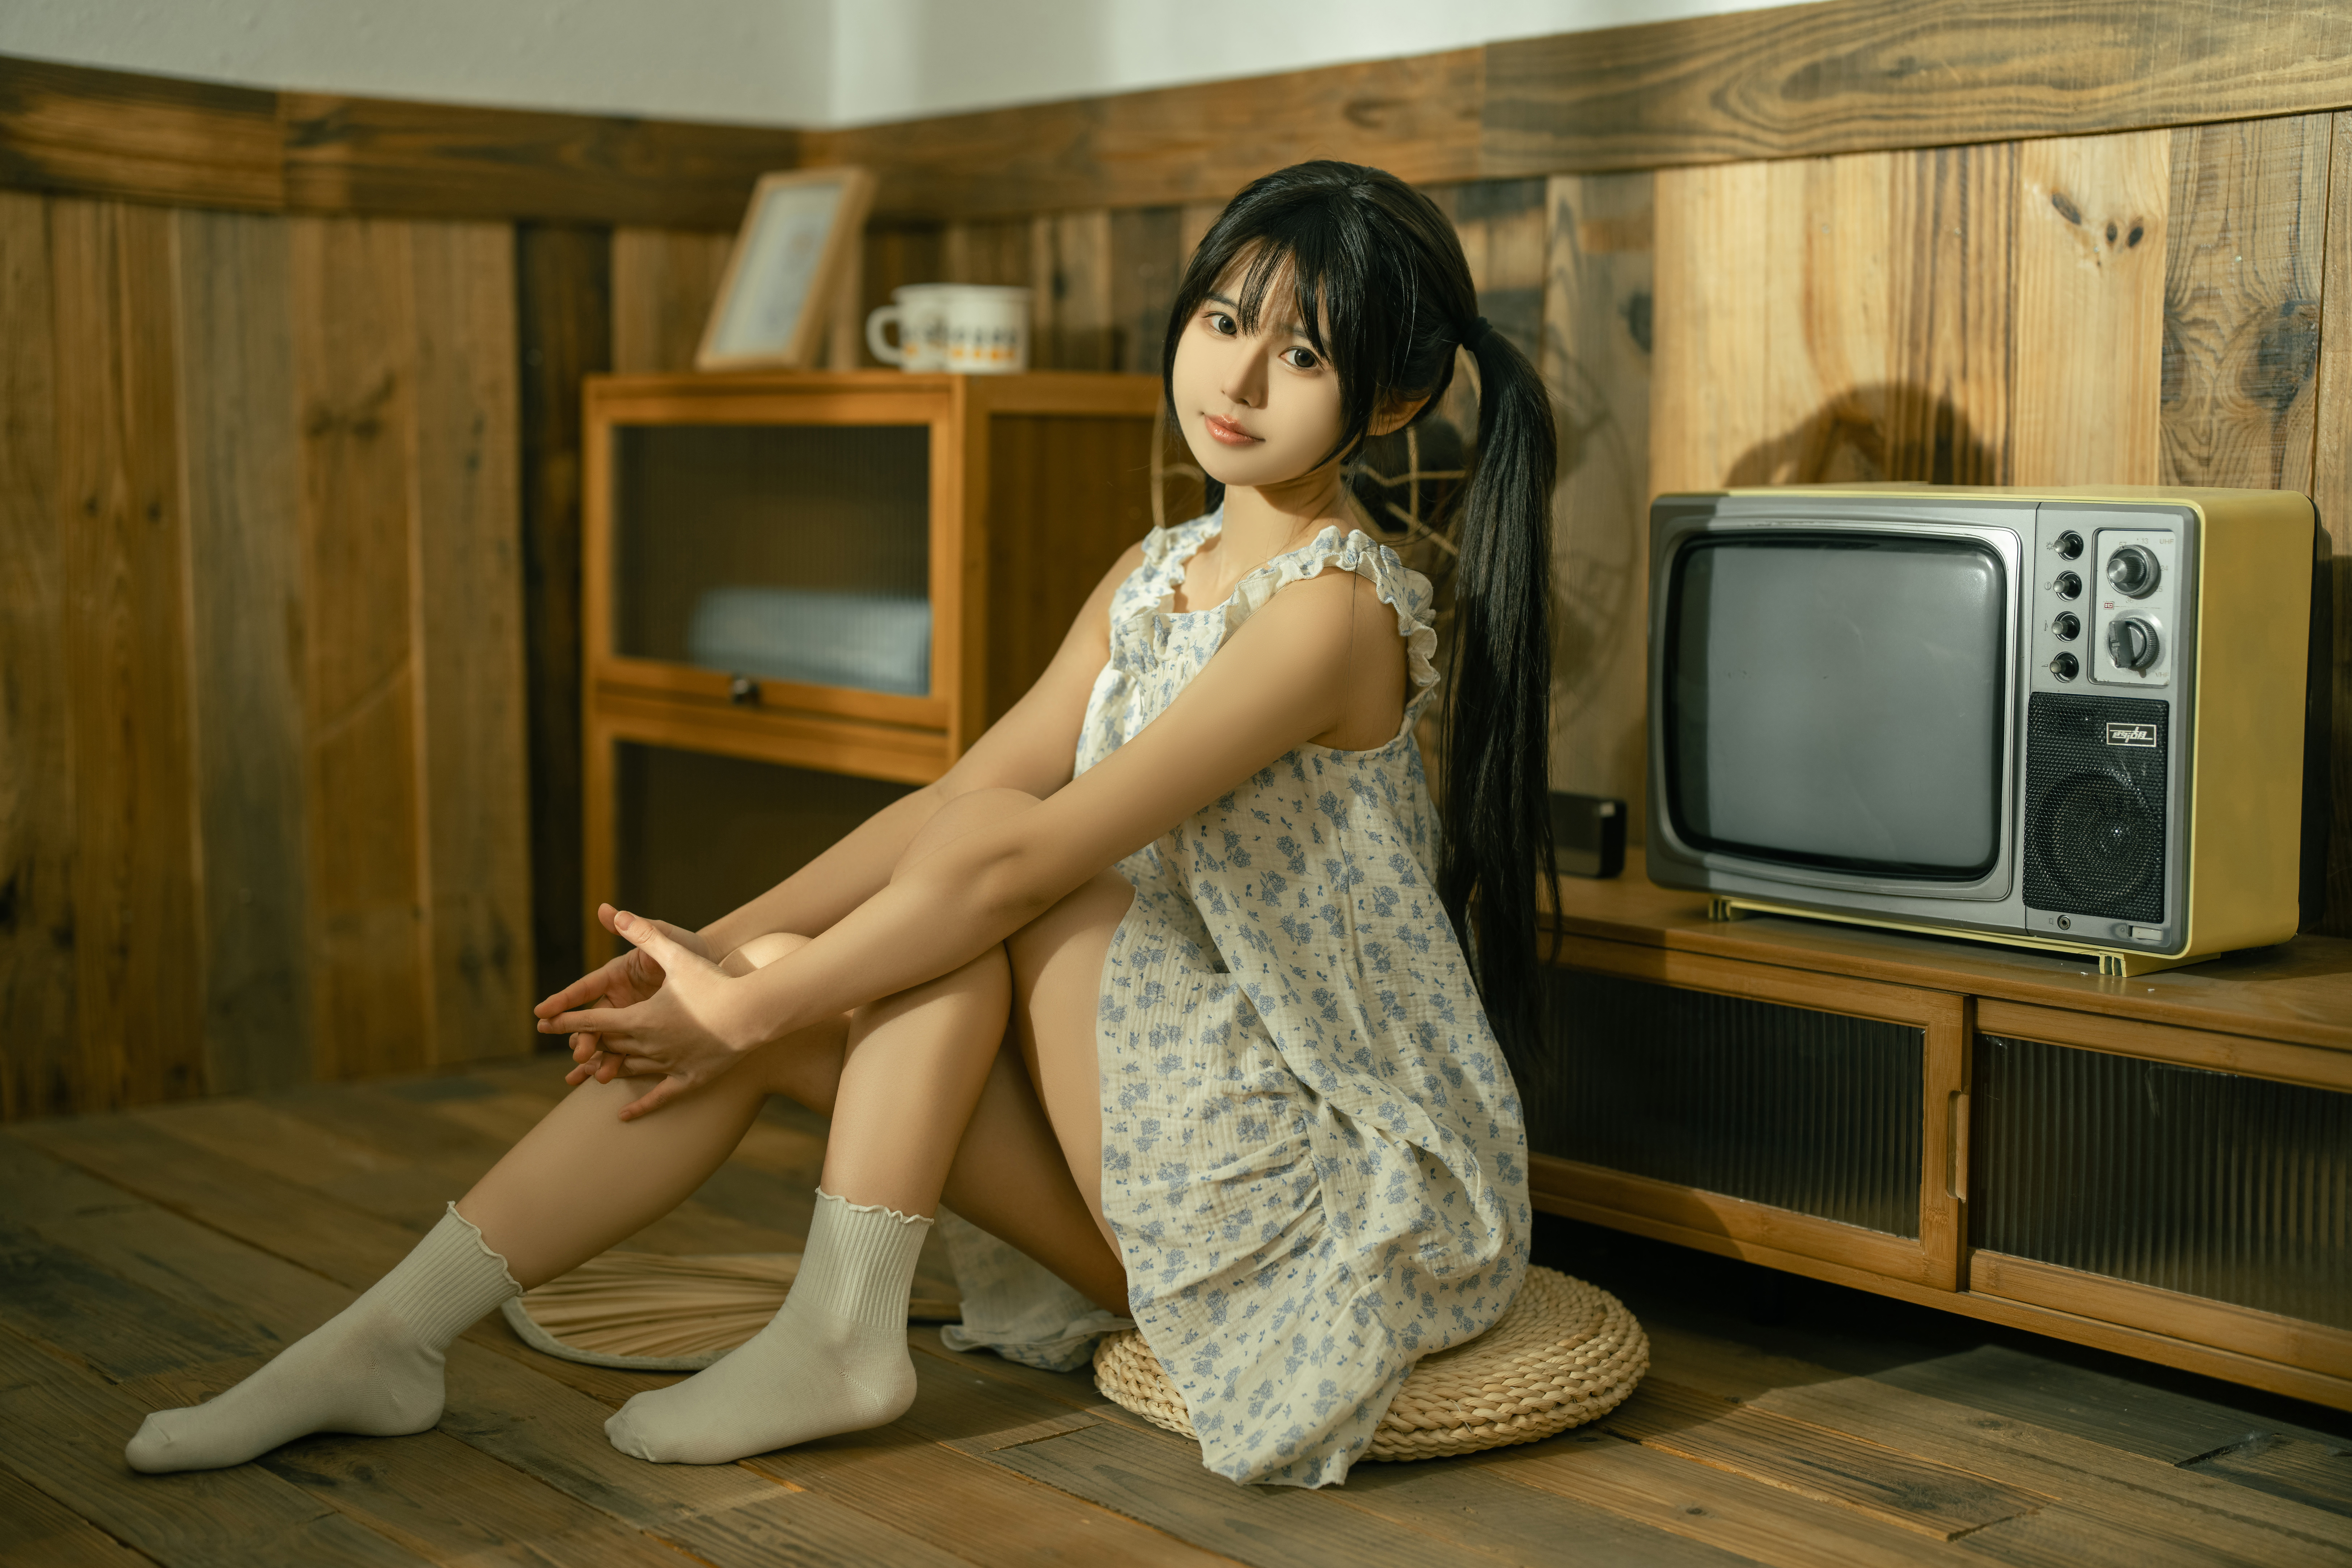 Women Model Asian Black Hair Twintails Dress Legs Looking At Viewer On The Floor TV Side View 6500x4333